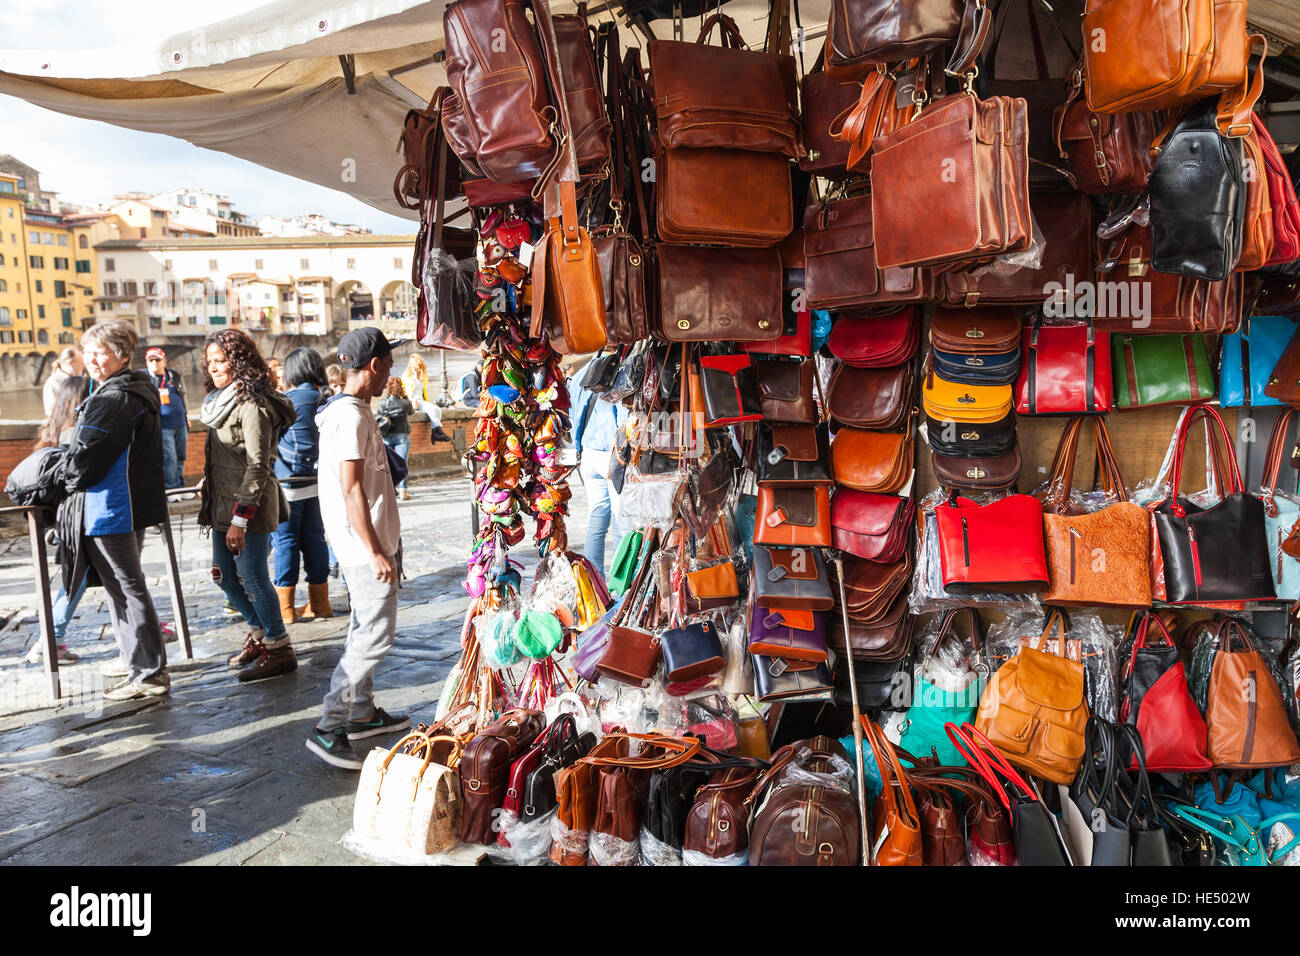 FLORENCE, ITALY - NOVEMBER 6, 2016: local leather bags on street shop Stock Photo: 129187601 - Alamy